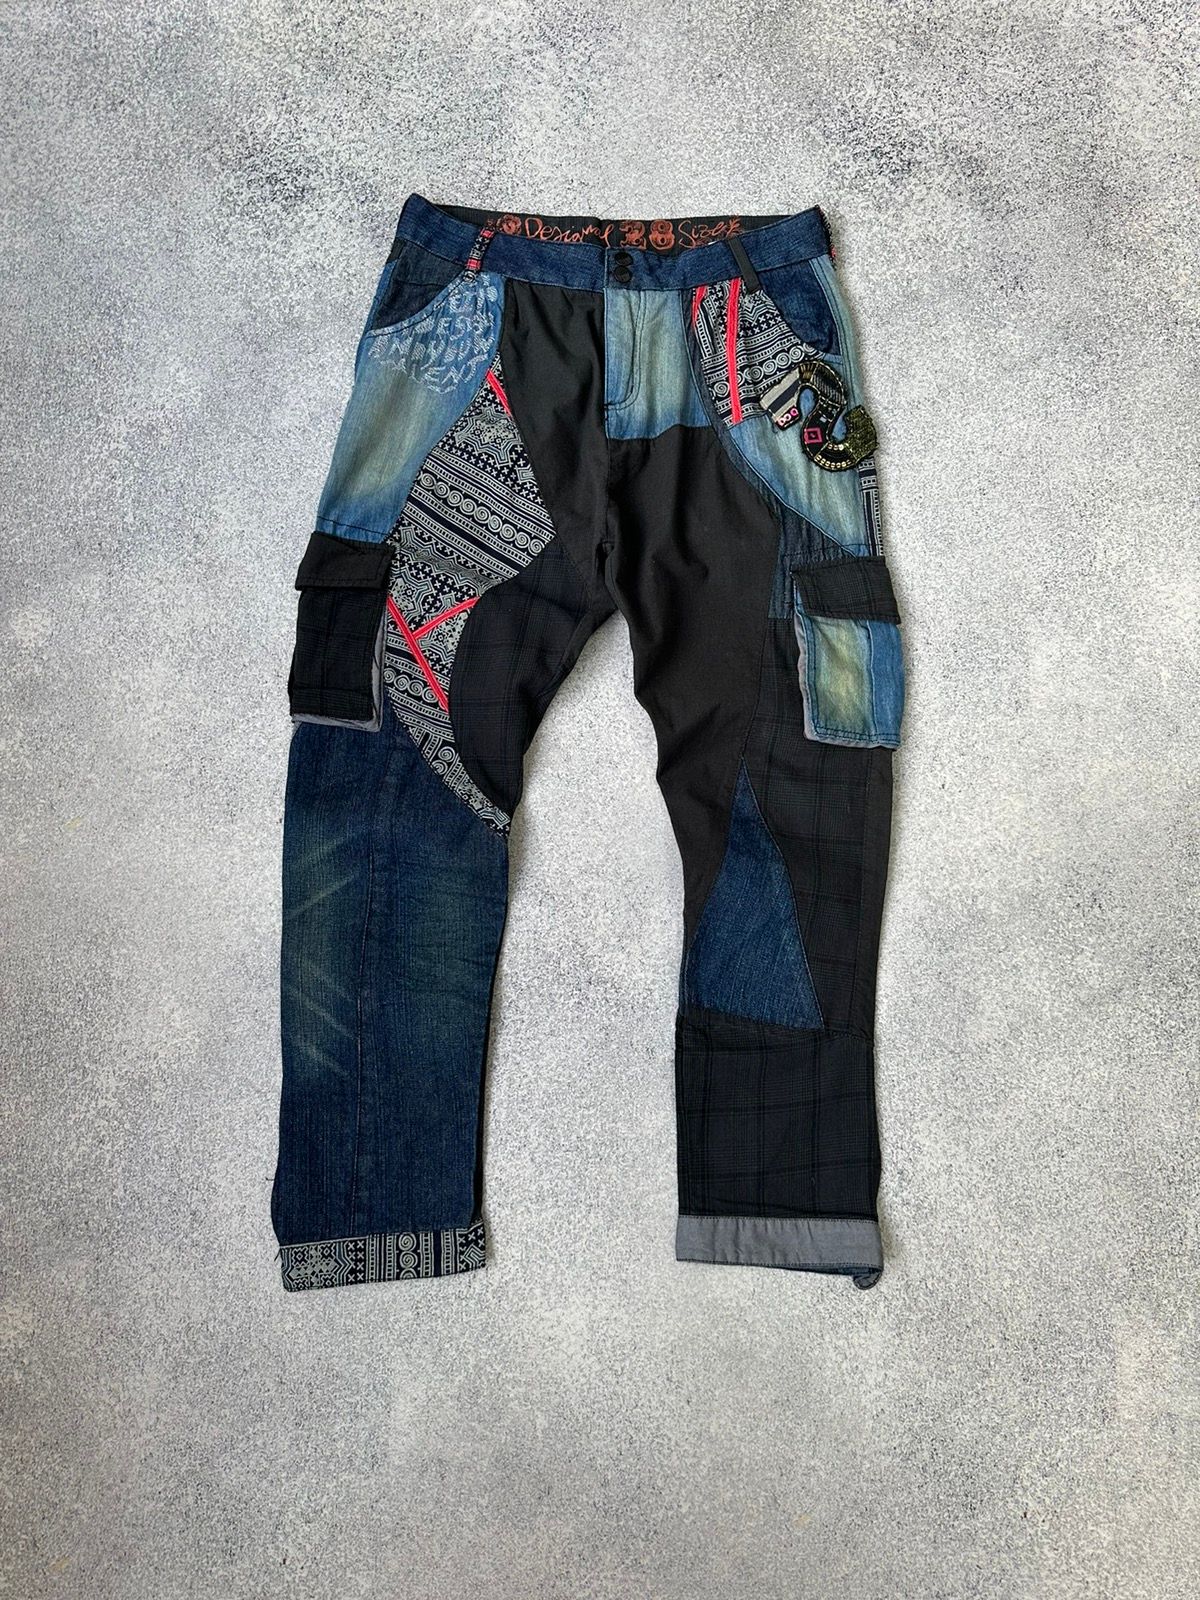 Pre-owned Archival Clothing X Vintage Bandana Patchwork Multicolored Archival Pants